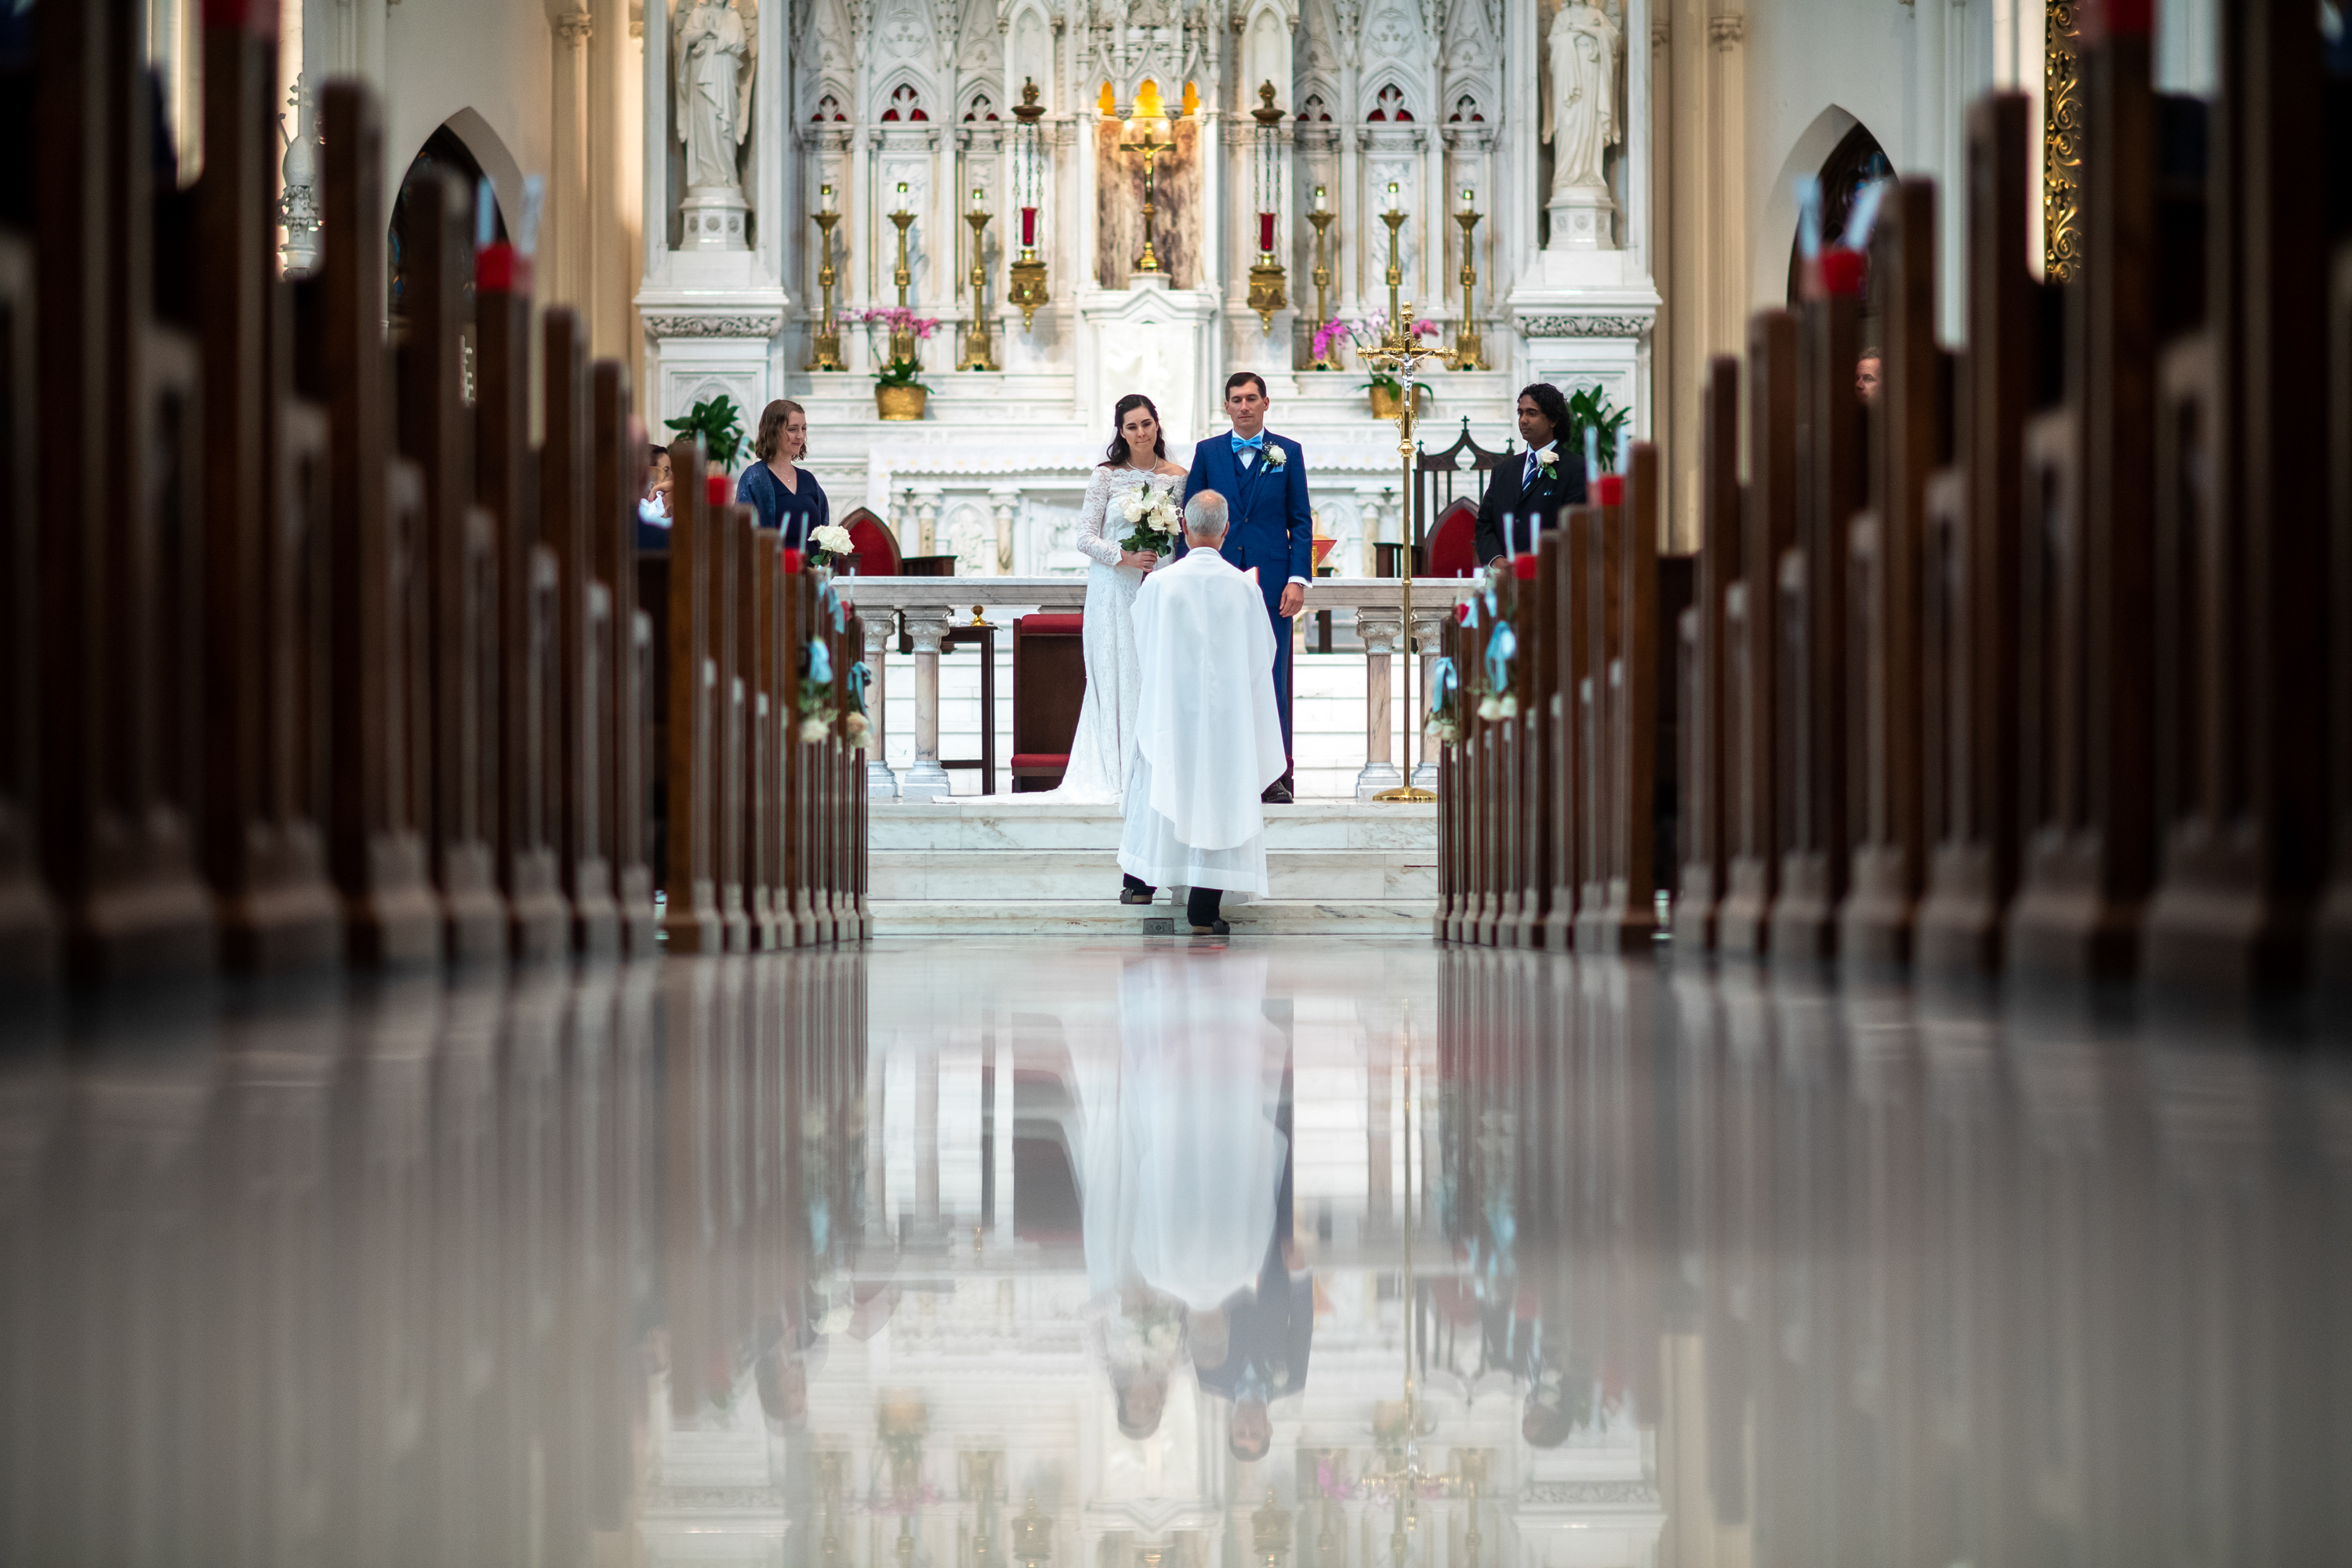 Bride and groom during their wedding at the Cathedral Basilica of the Immaculate Conception in Denver, Colorado.